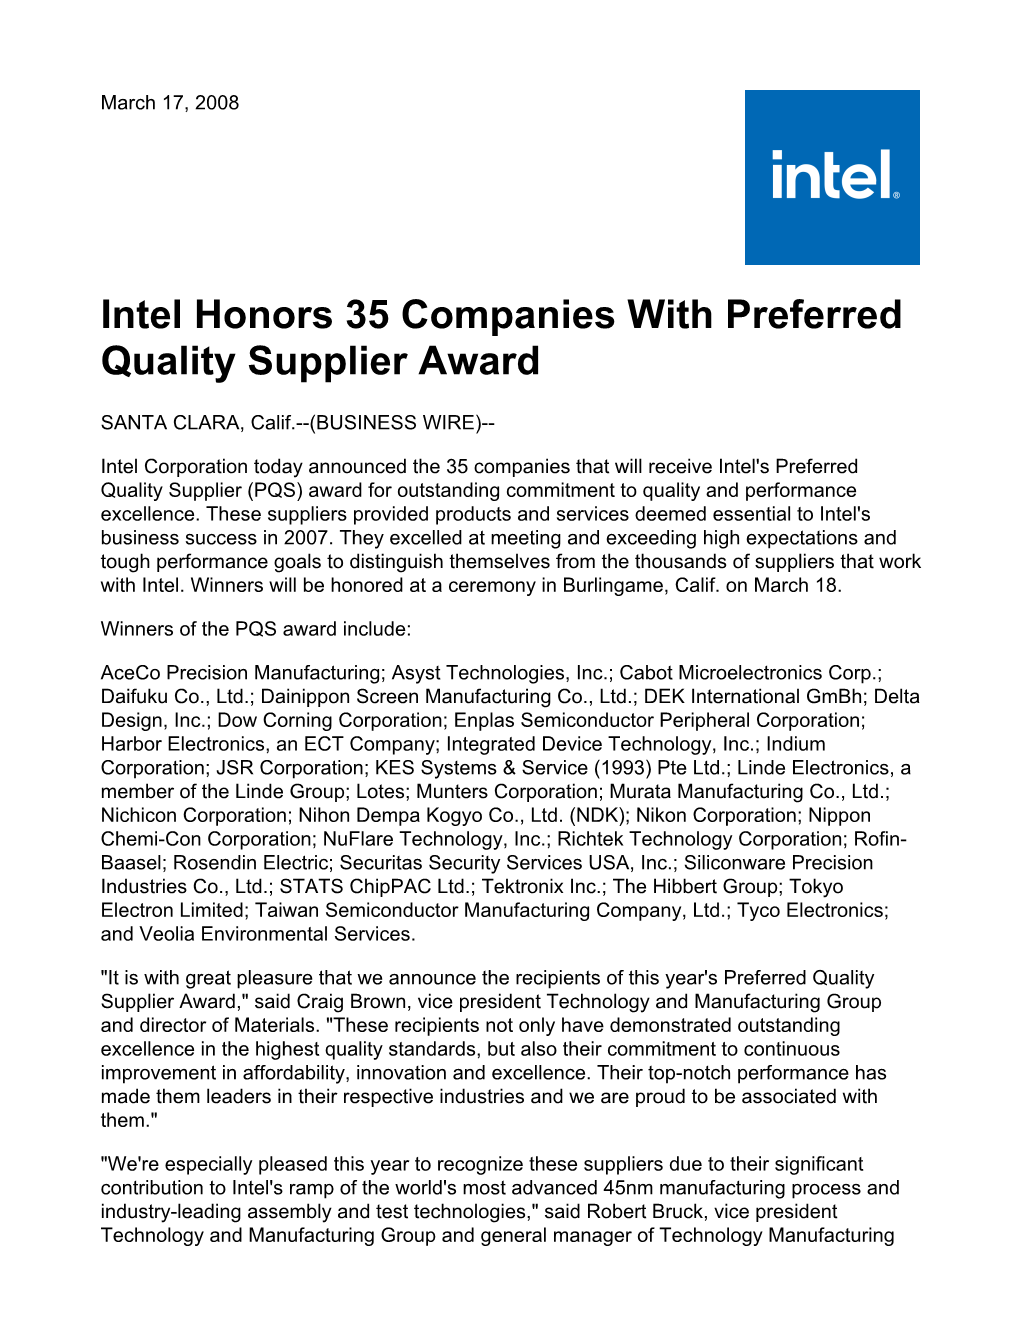 Intel Honors 35 Companies with Preferred Quality Supplier Award